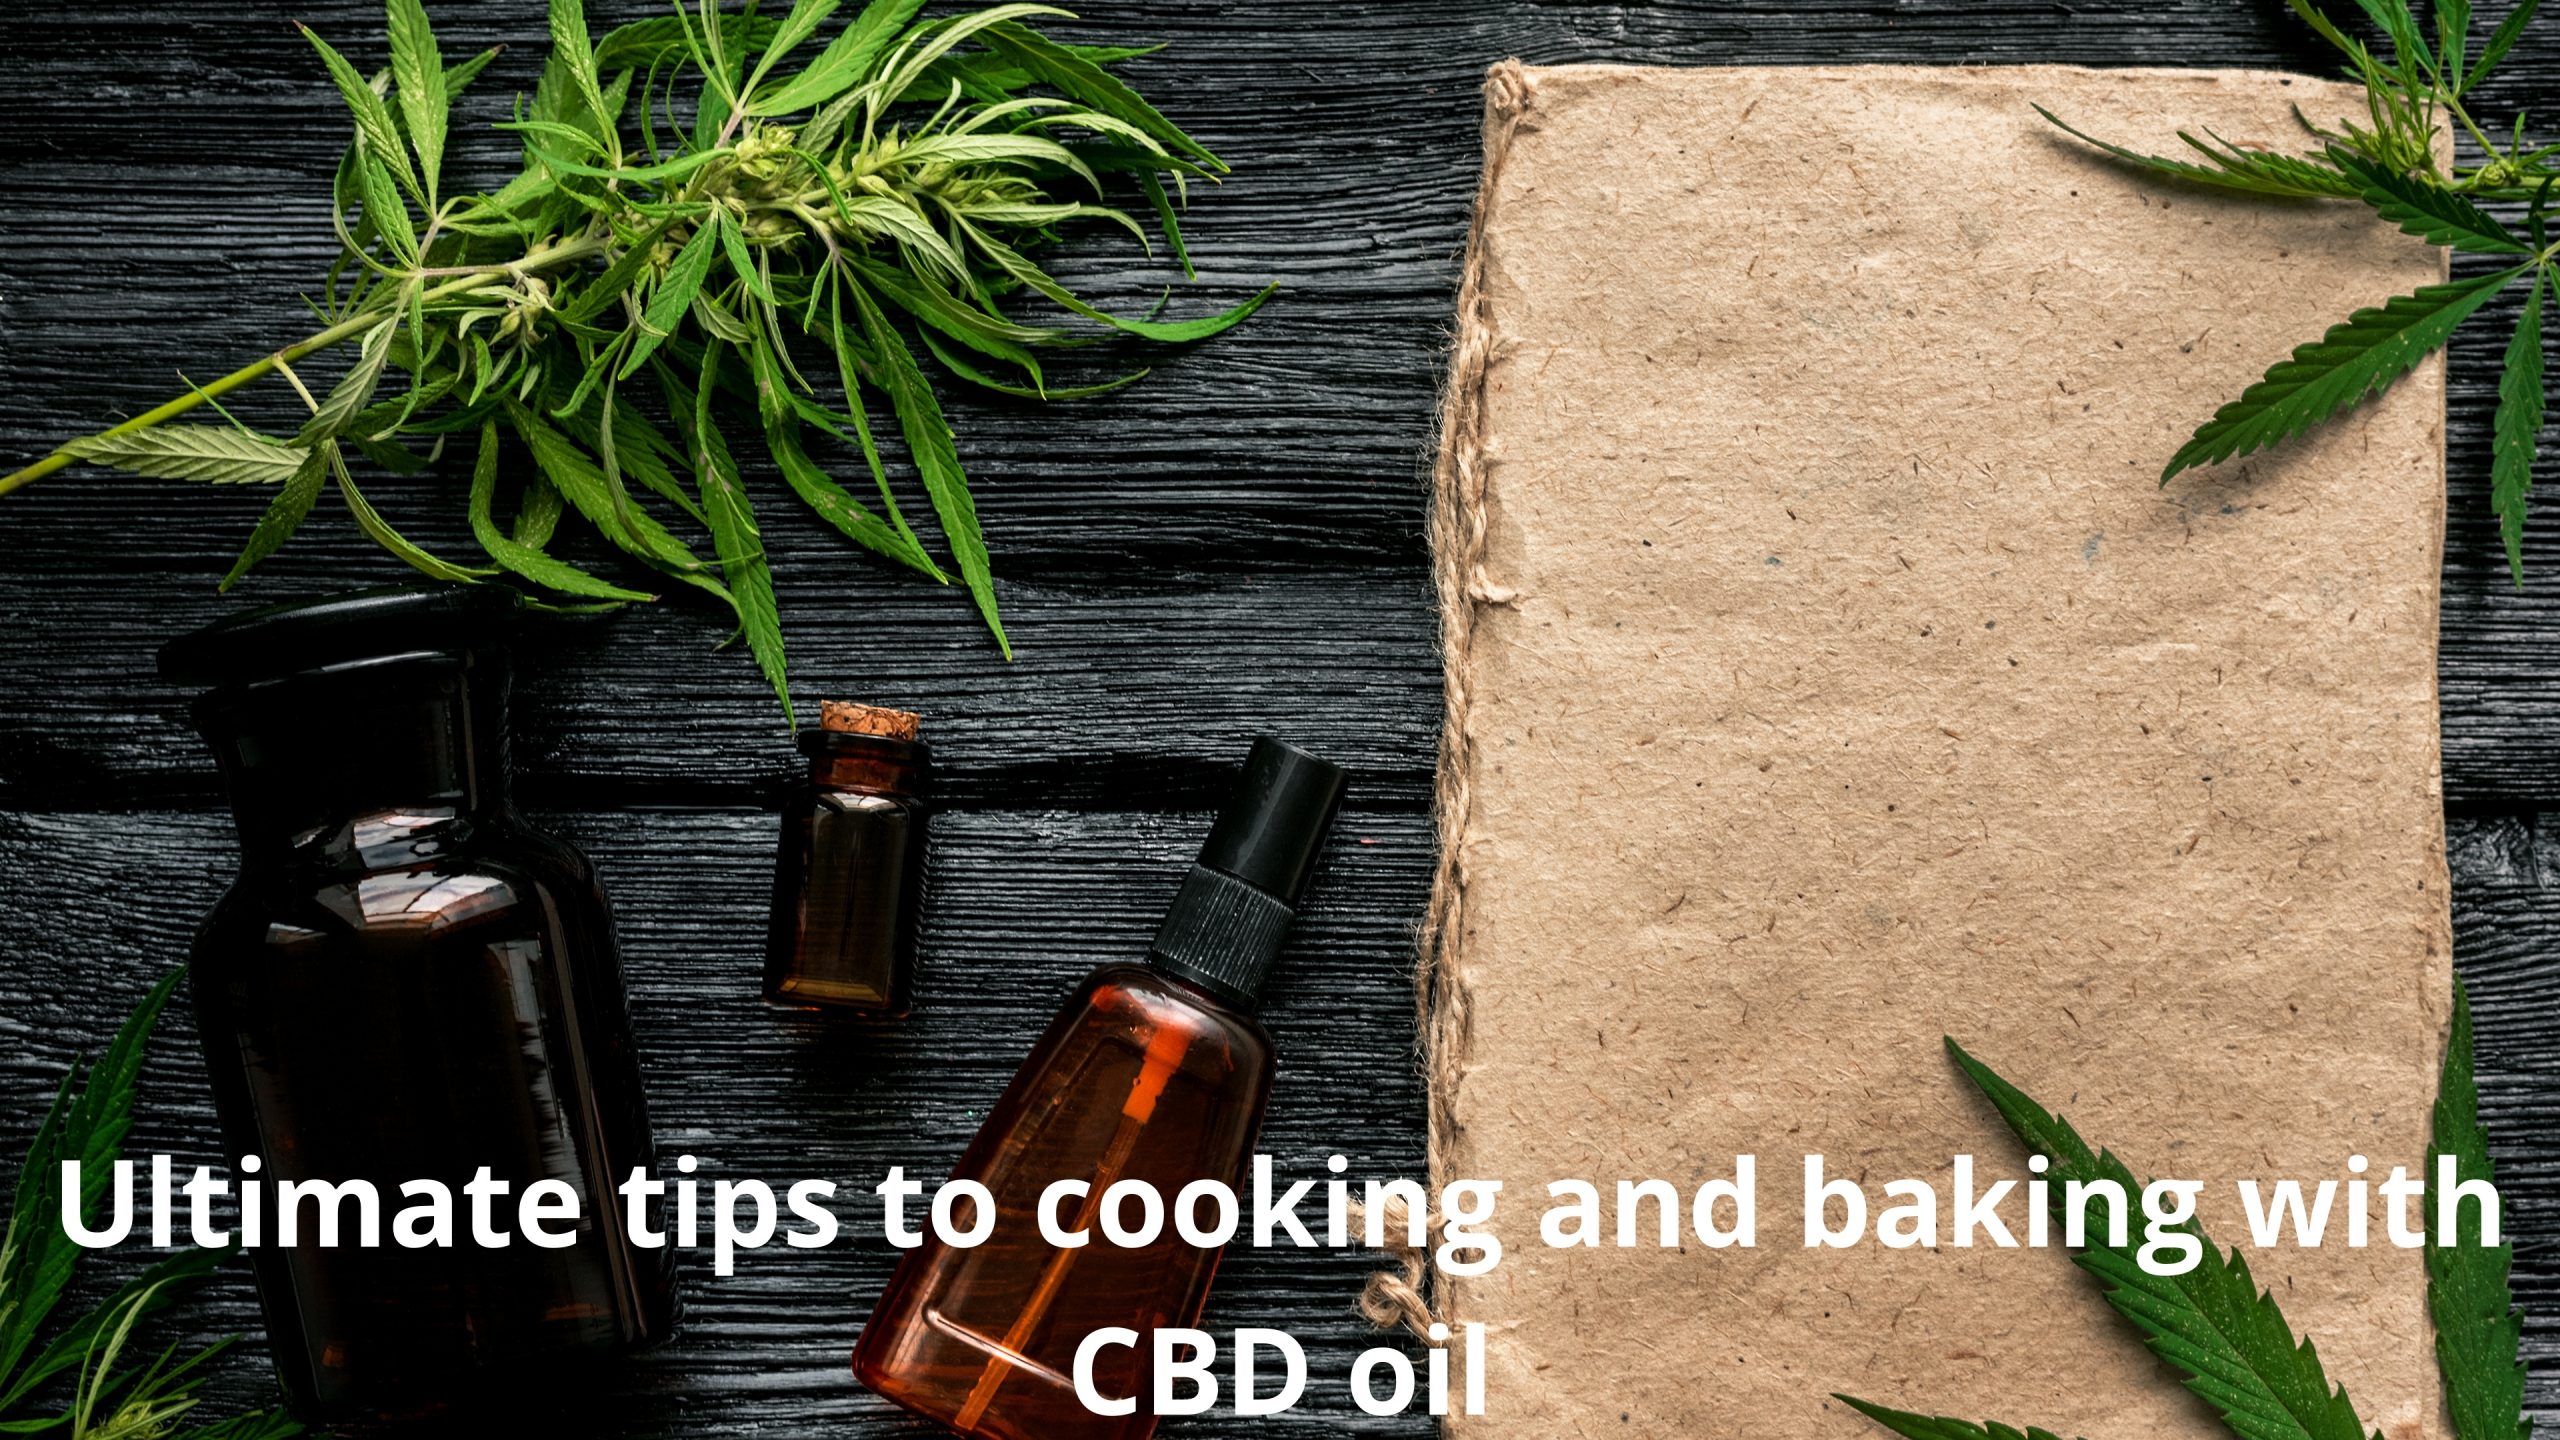 Ultimate tips to cooking and baking with CBD oil